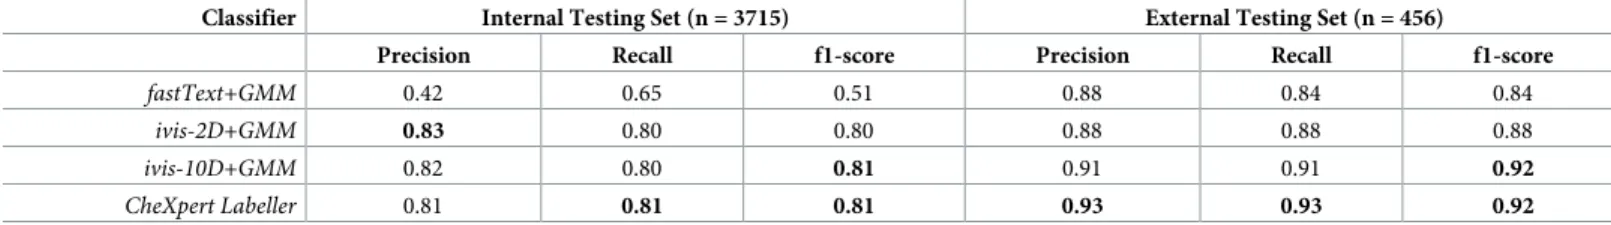 Table 2. Performance comparison of unsupervised classifiers on internal and external radiological reports